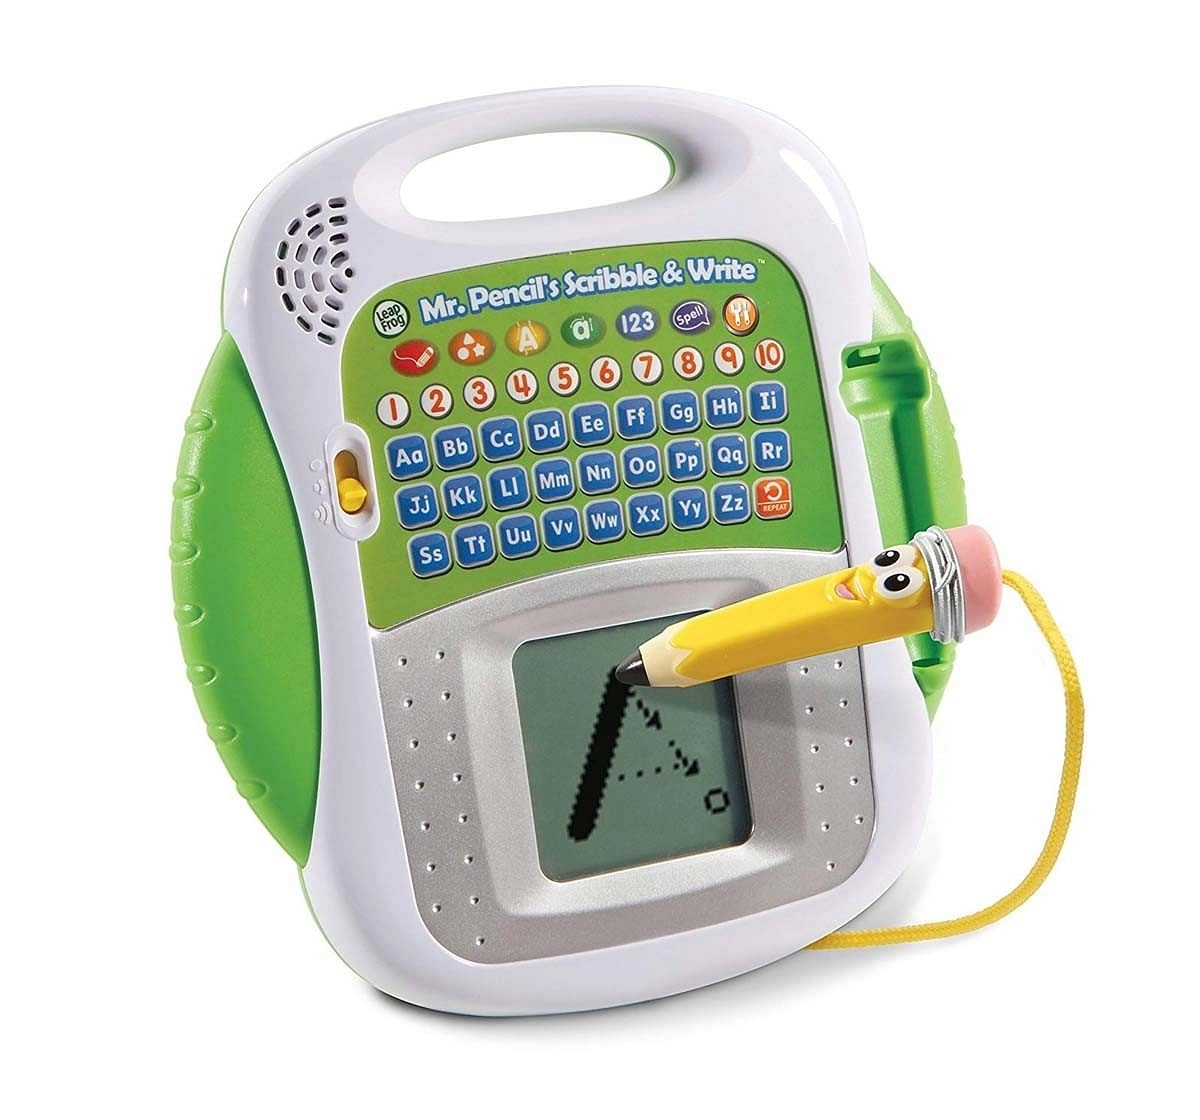 Leap Frog Mr. Pencil'S Scribble And Write Learning Toys for Kids age 3Y+ 